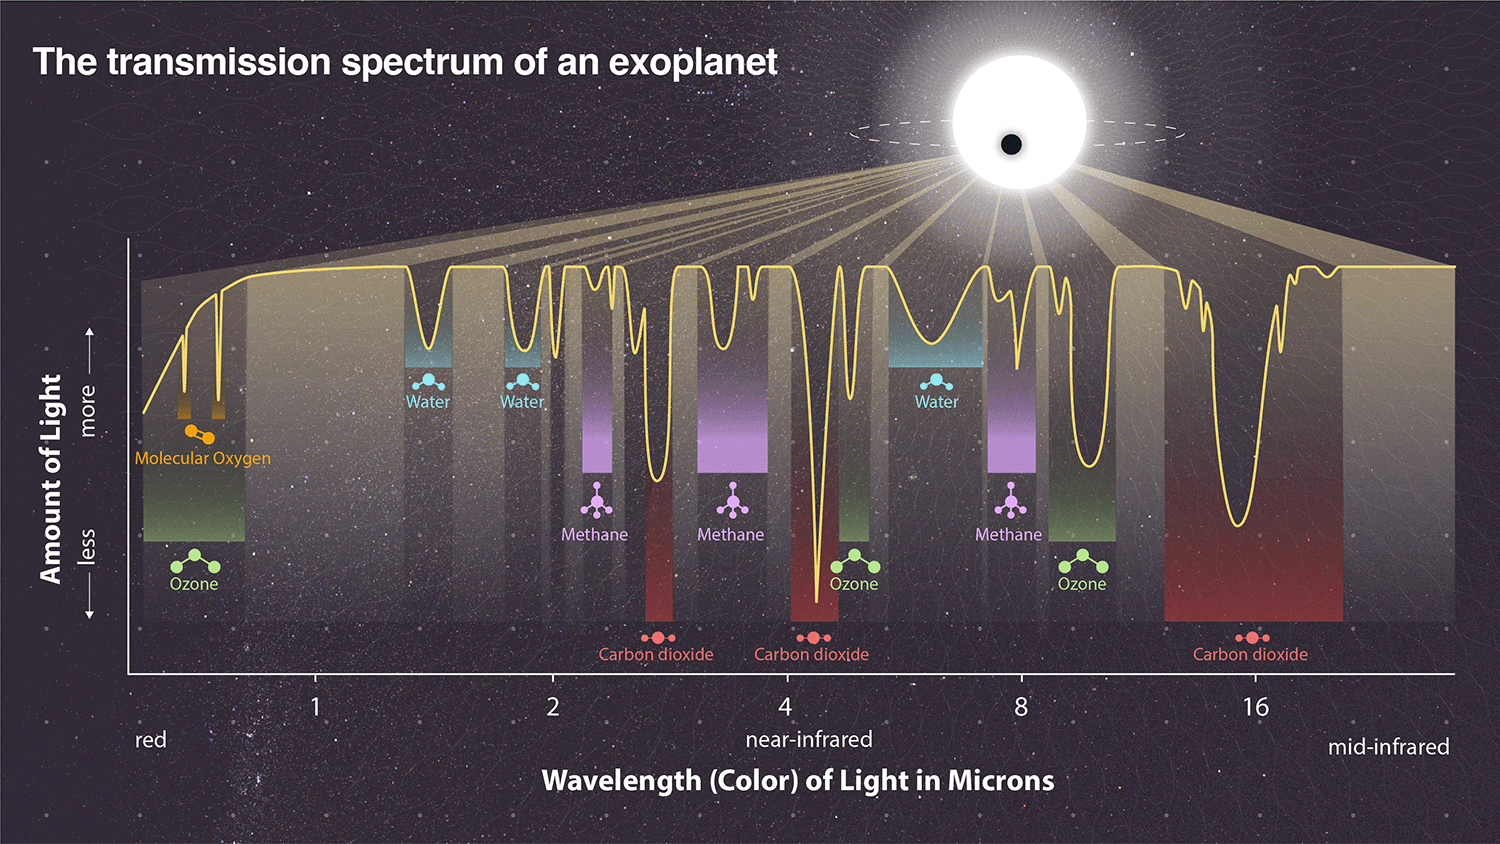 Graphic shows the peaks and valleys that represent various molecules in the transmsiion spectrum of a hypothetical Earth-like exoplanet.